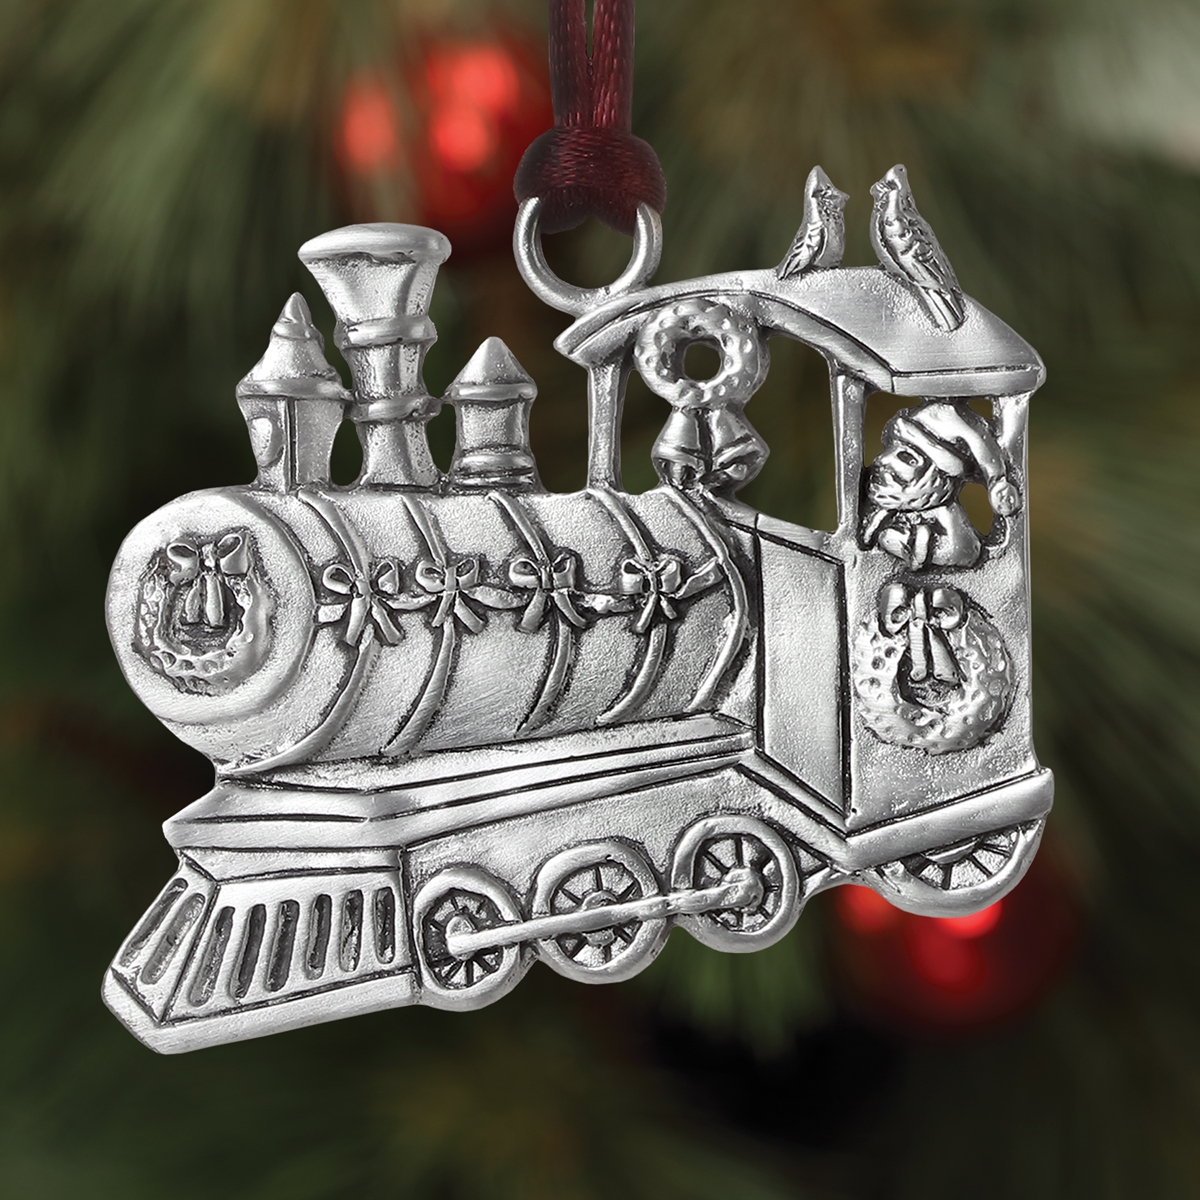 Holiday Express Plant a Tree Ornament